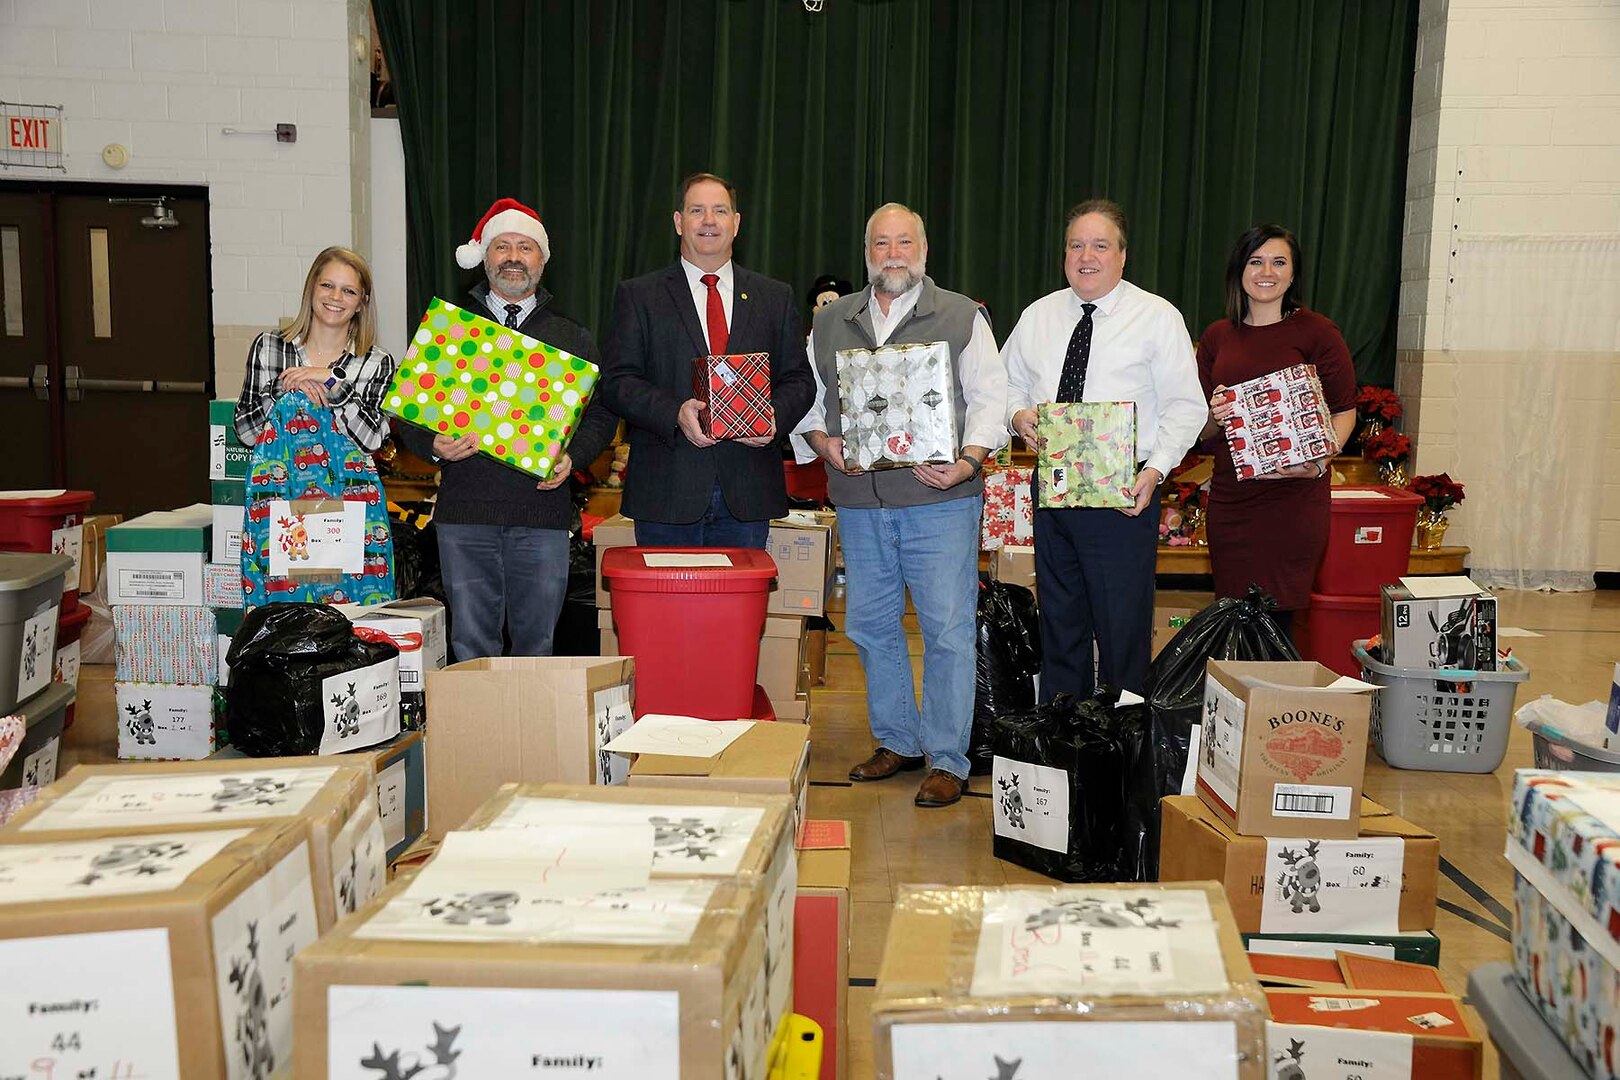 Senior leaders and campaign coordinators take a moment to reflect on the generosity that provided the hundreds of items donated to support local families in need. Shown from left to right are and LeAnn Gaviglio, delivery and volunteer coordinator; Don Phillips, DLA Installation Support at Battle Creek site director; Kevin Faber, local DLA Information Operations “mayor;” Ray Zingaretti, Logistics Information Services director and Elli Blonde, who coordinated the collection efforts among the local Defense Logistics Agency activities.